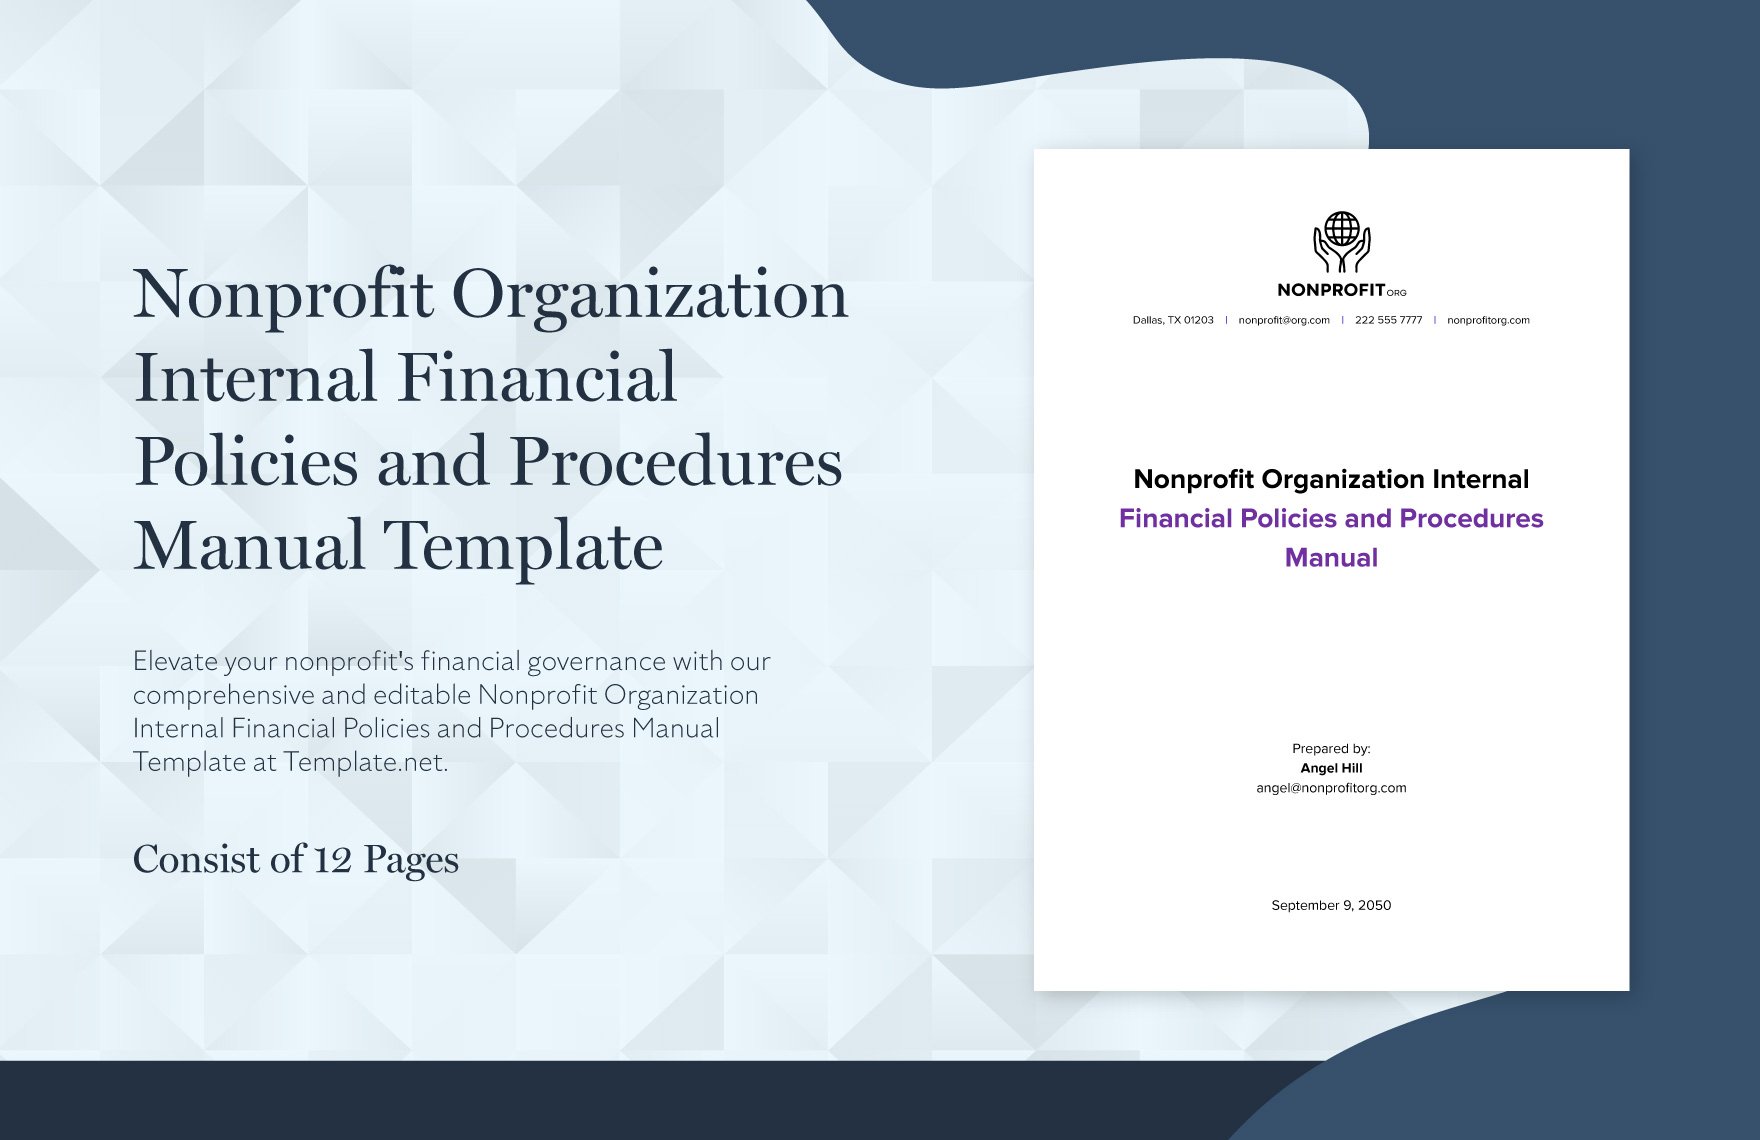 Nonprofit Organization Internal Financial Policies and Procedures Manual Template in Word, PDF